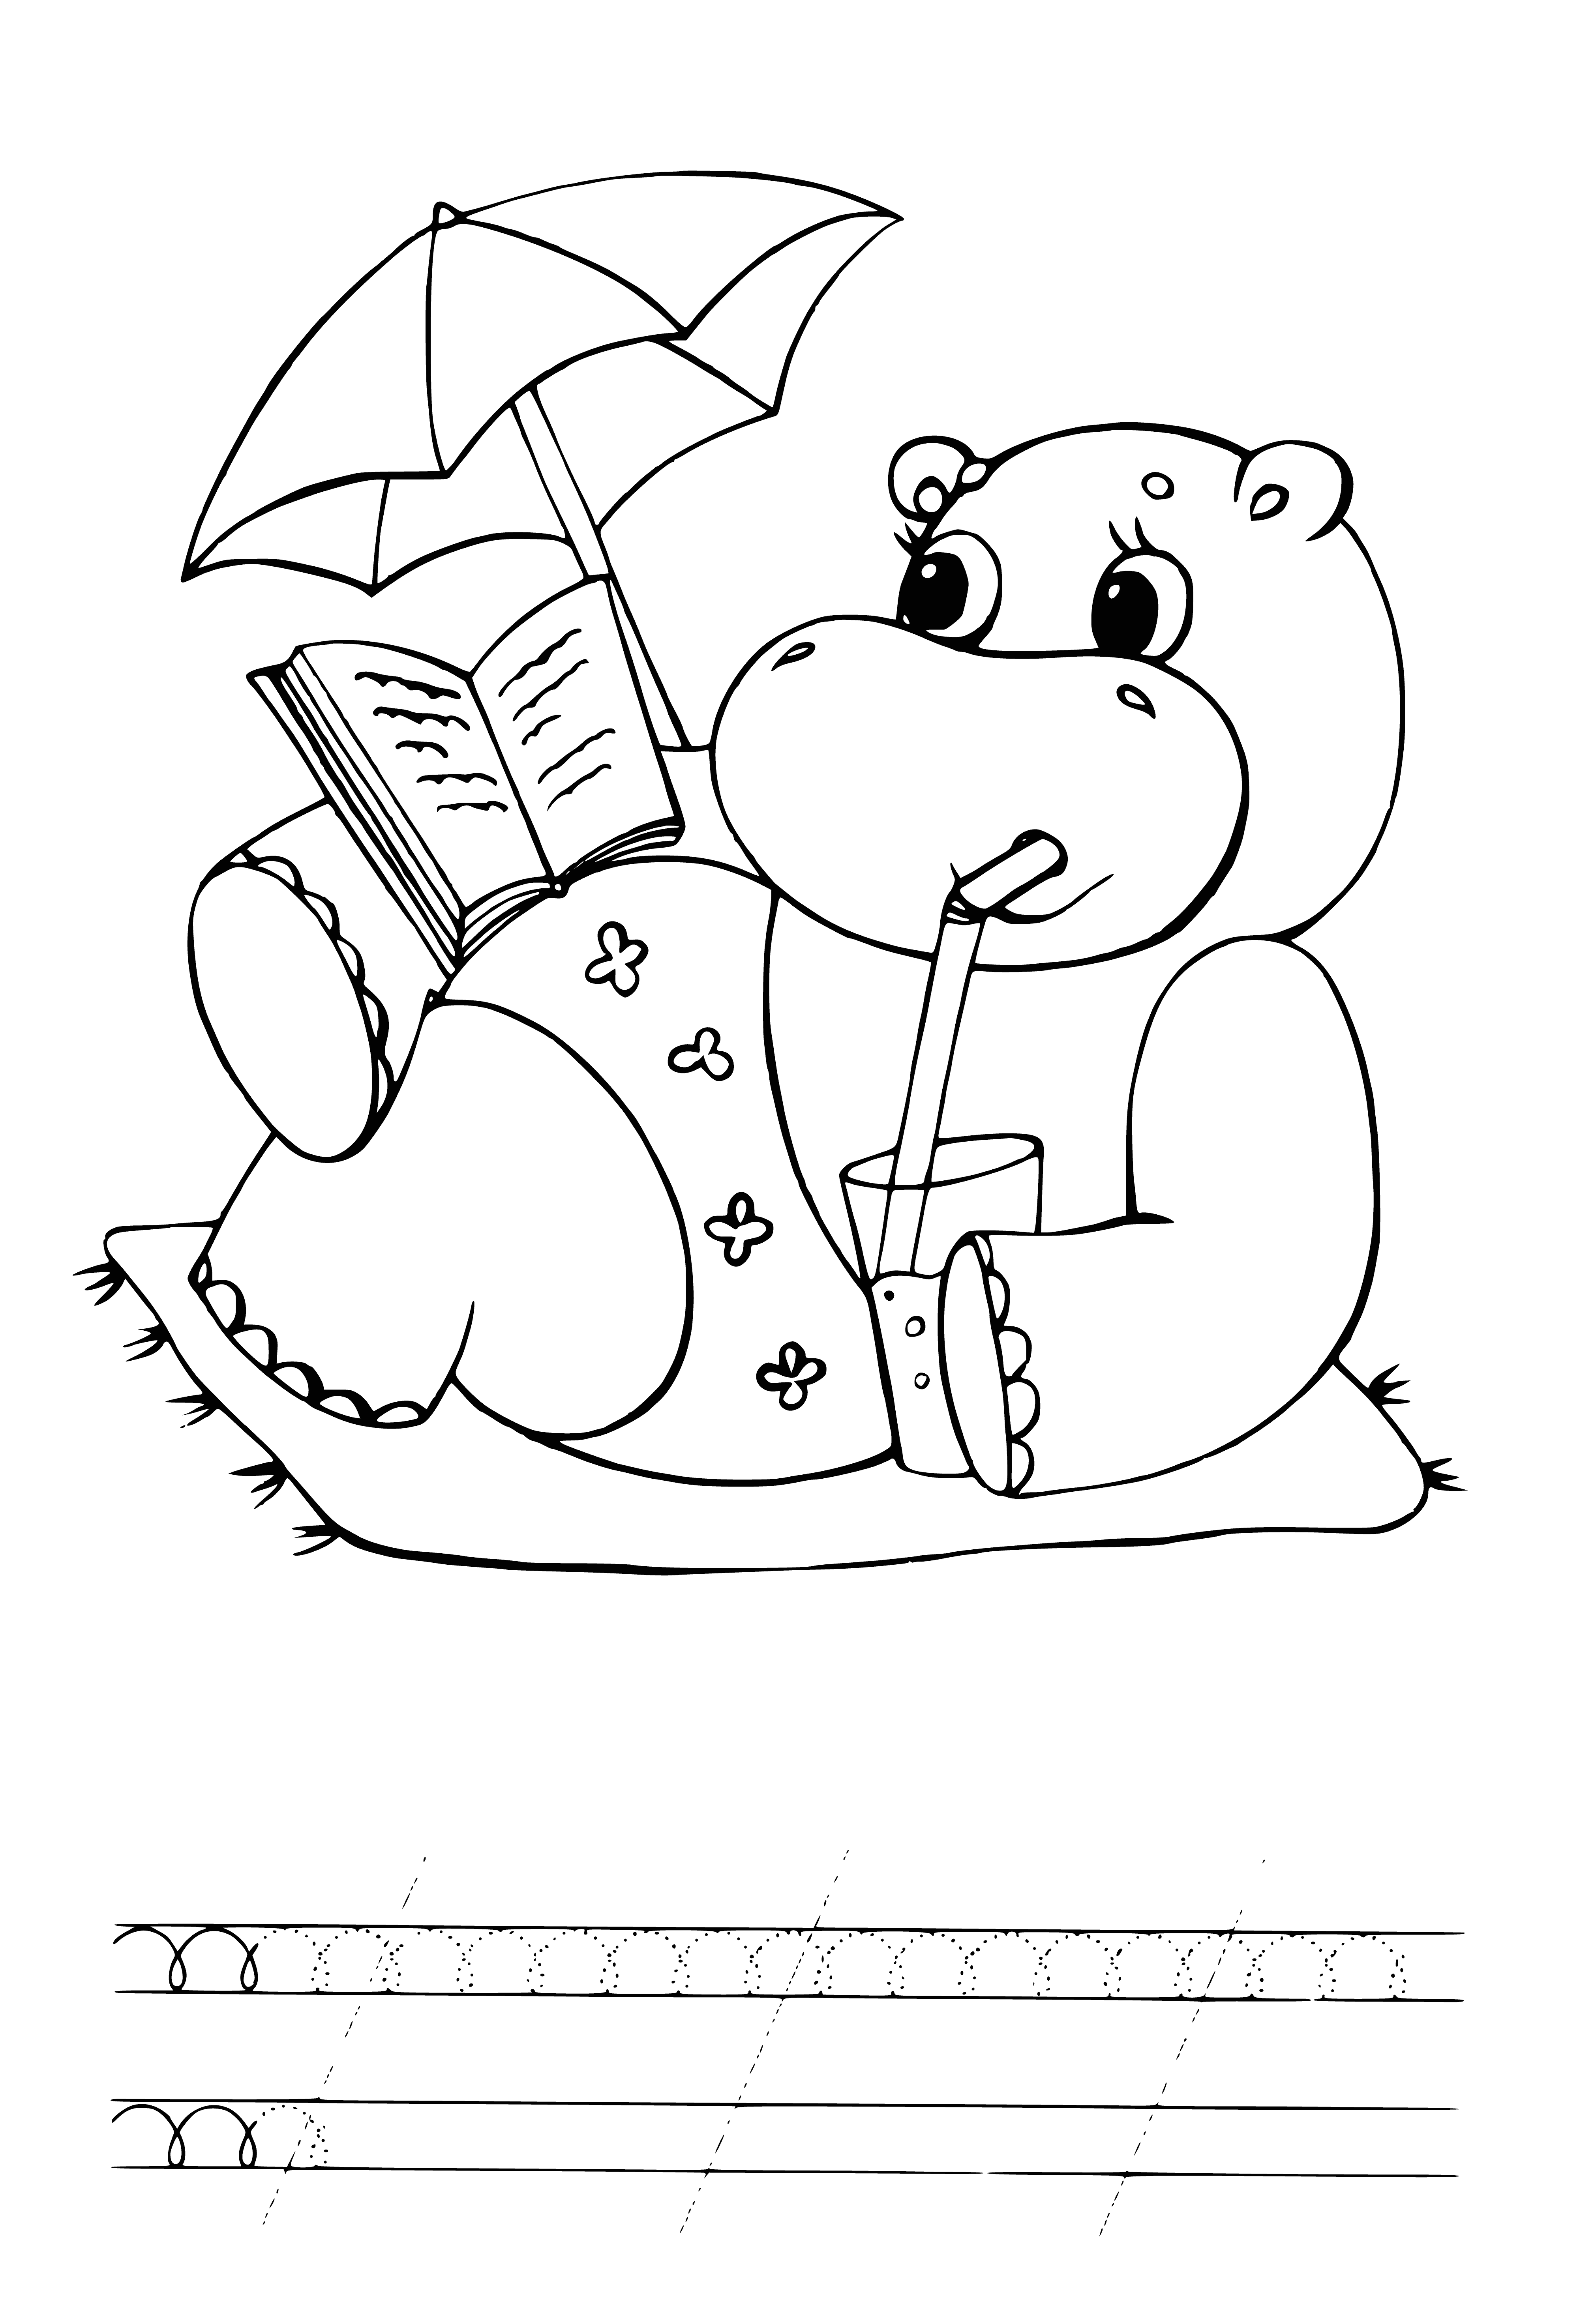 coloring page: Huge gray mammal w/ short legs, large head, wide mouth, warts, small eyes & ears, sharp teeth.